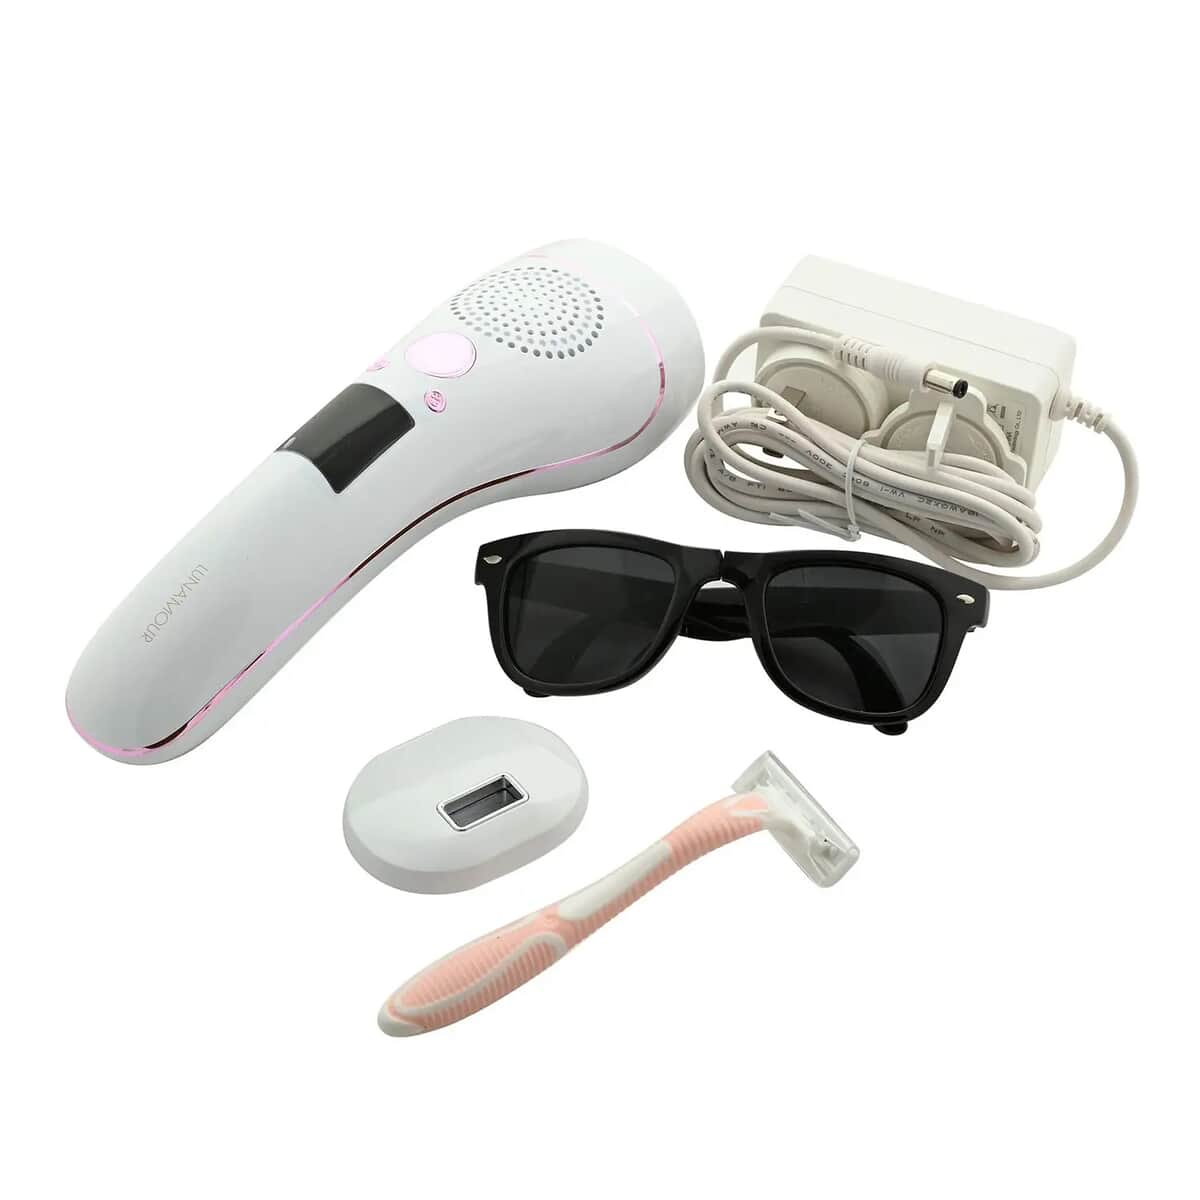 Luna'Mour ICE Cool IPL Hair Removal Device & Photofacial image number 0